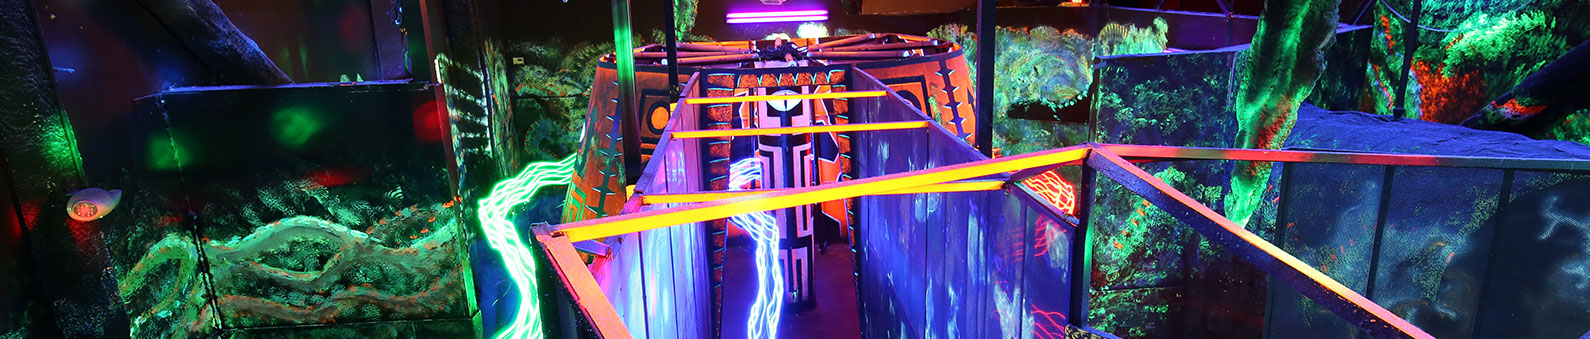 Ultrazone Laser Tag - Find exhilaration here, only at Ultrazone!